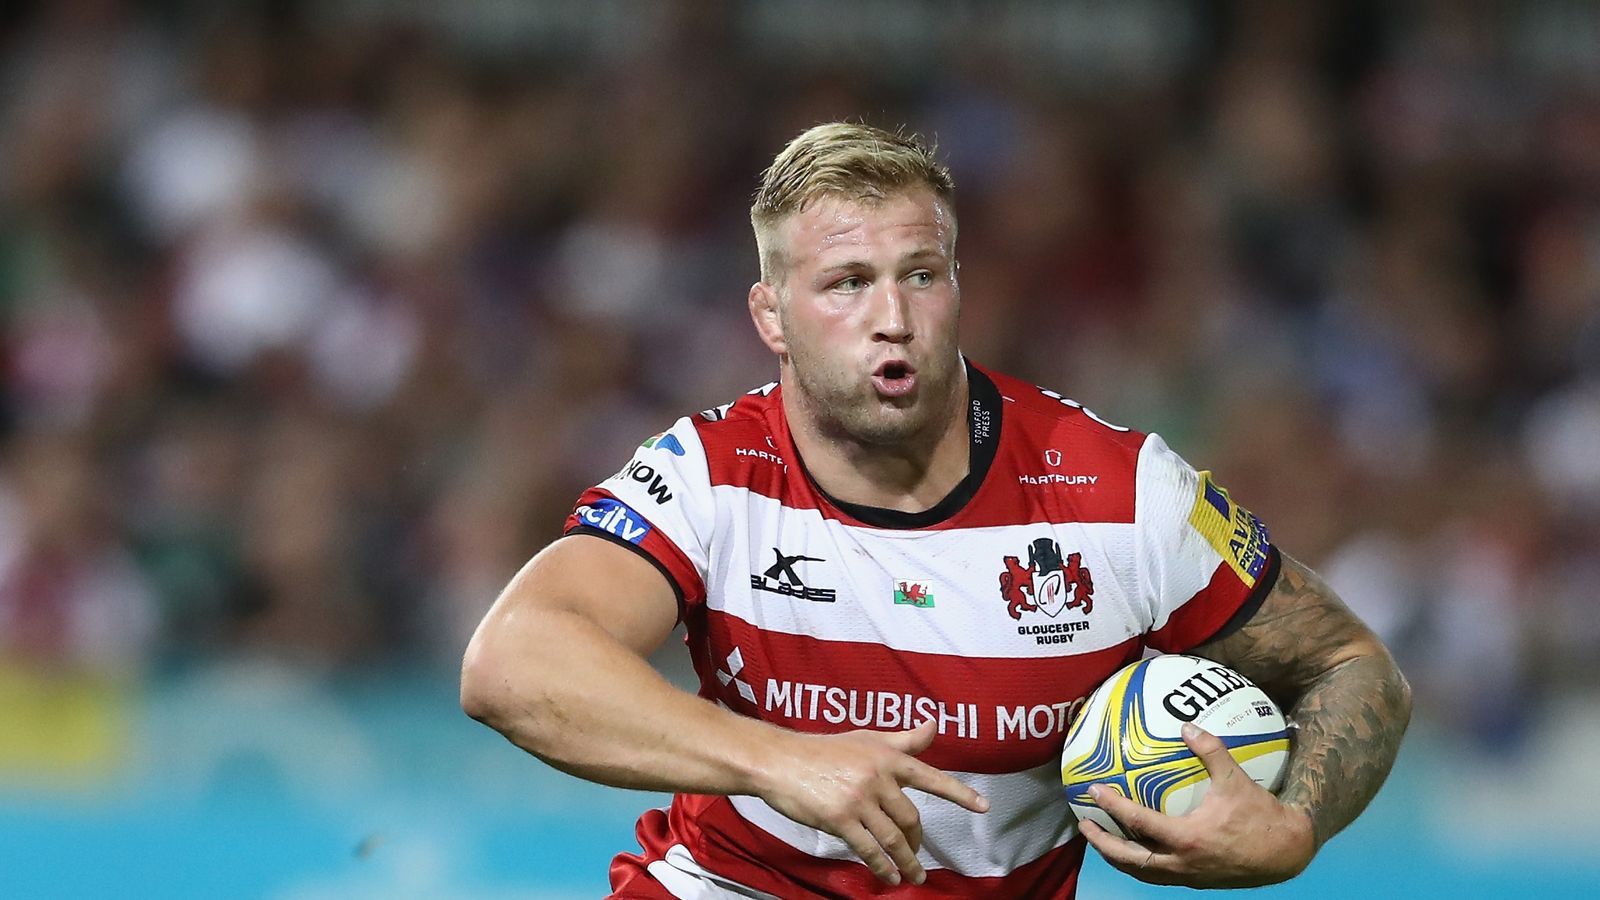 Ross Moriarty to leave Gloucester for the Dragons | Rugby Union News ...